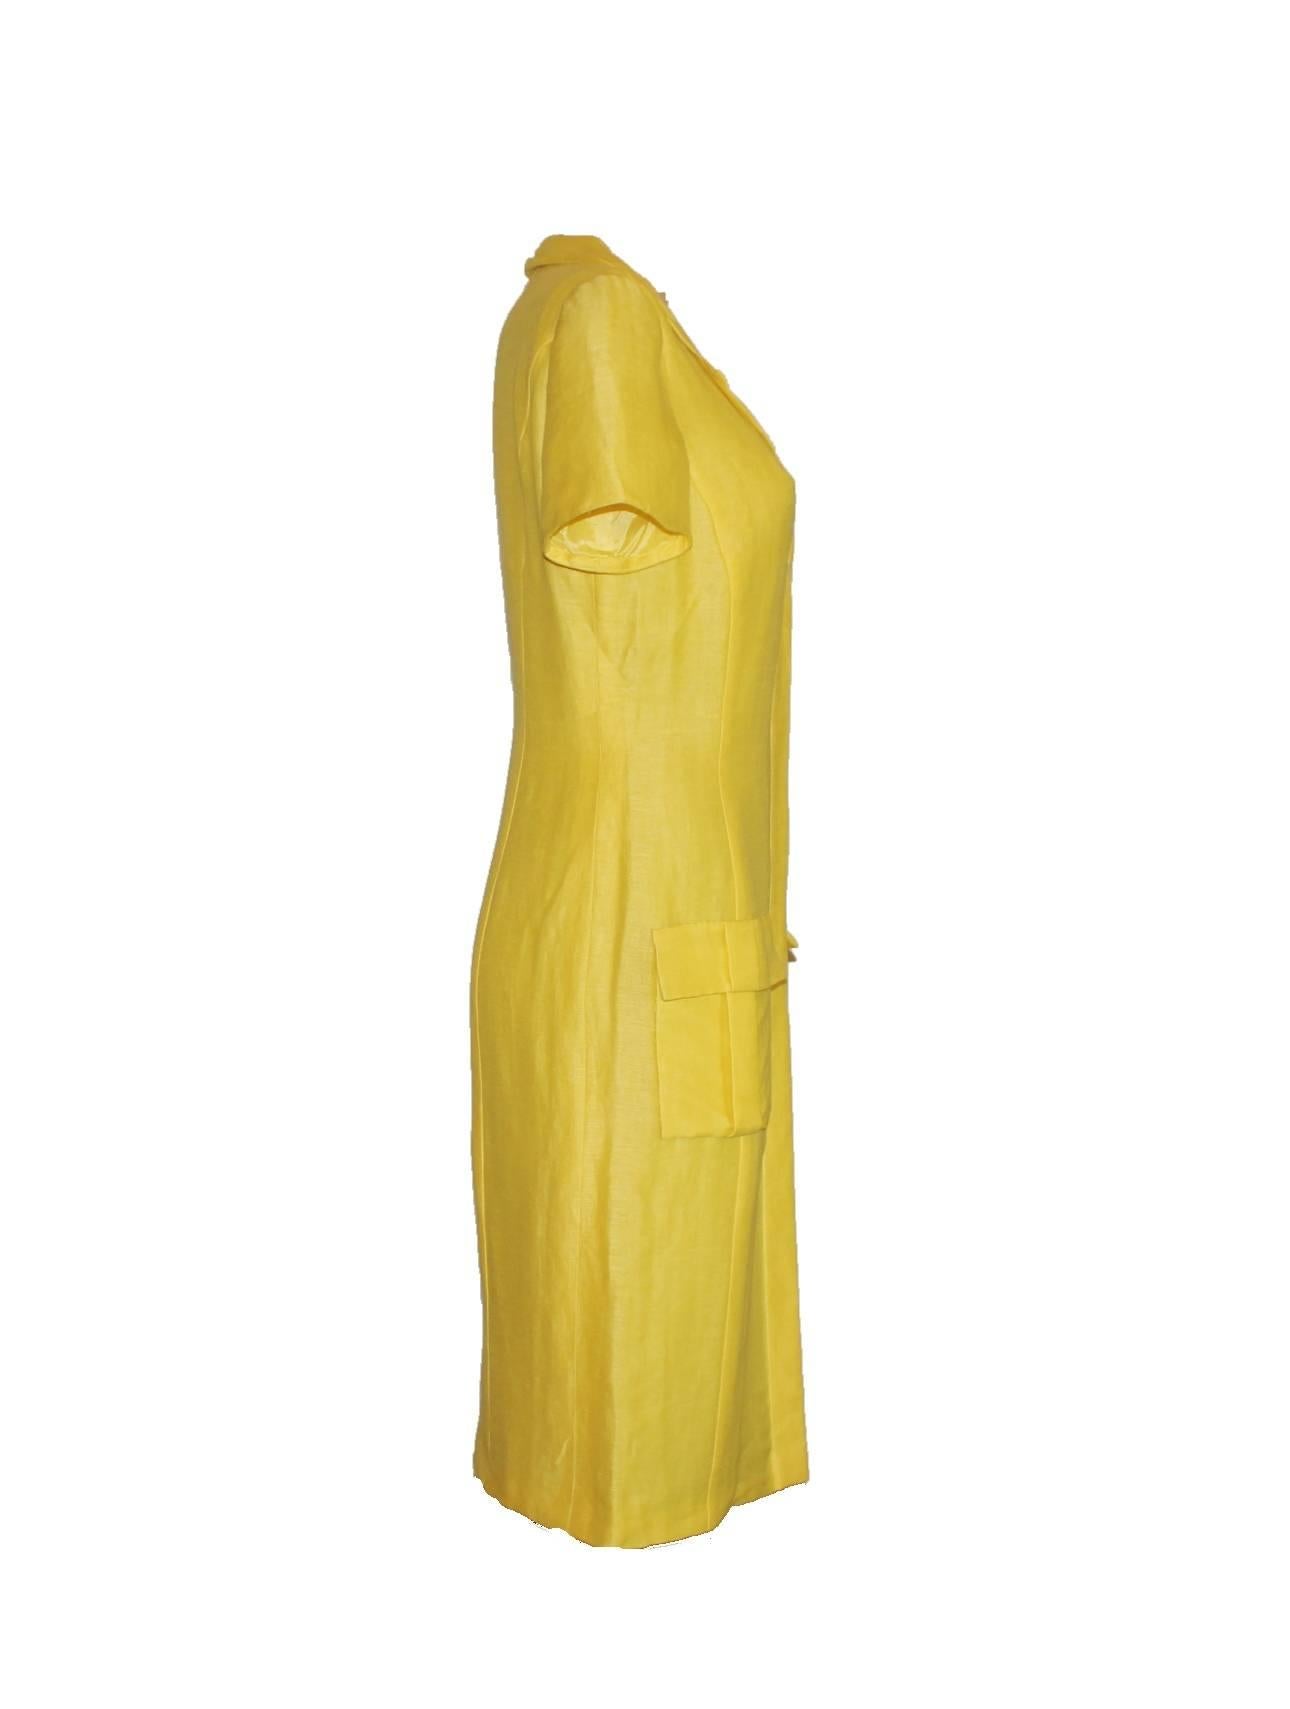 Canary-yellow silk and linen mix summer dress by Gianni Versace Couture
Closes in front with hidden buttons
Shown on runway show and in the AD campaign with Gisele
Fully lined
Two front pockets
Size 40
Made in Italy
Dry Clean Only